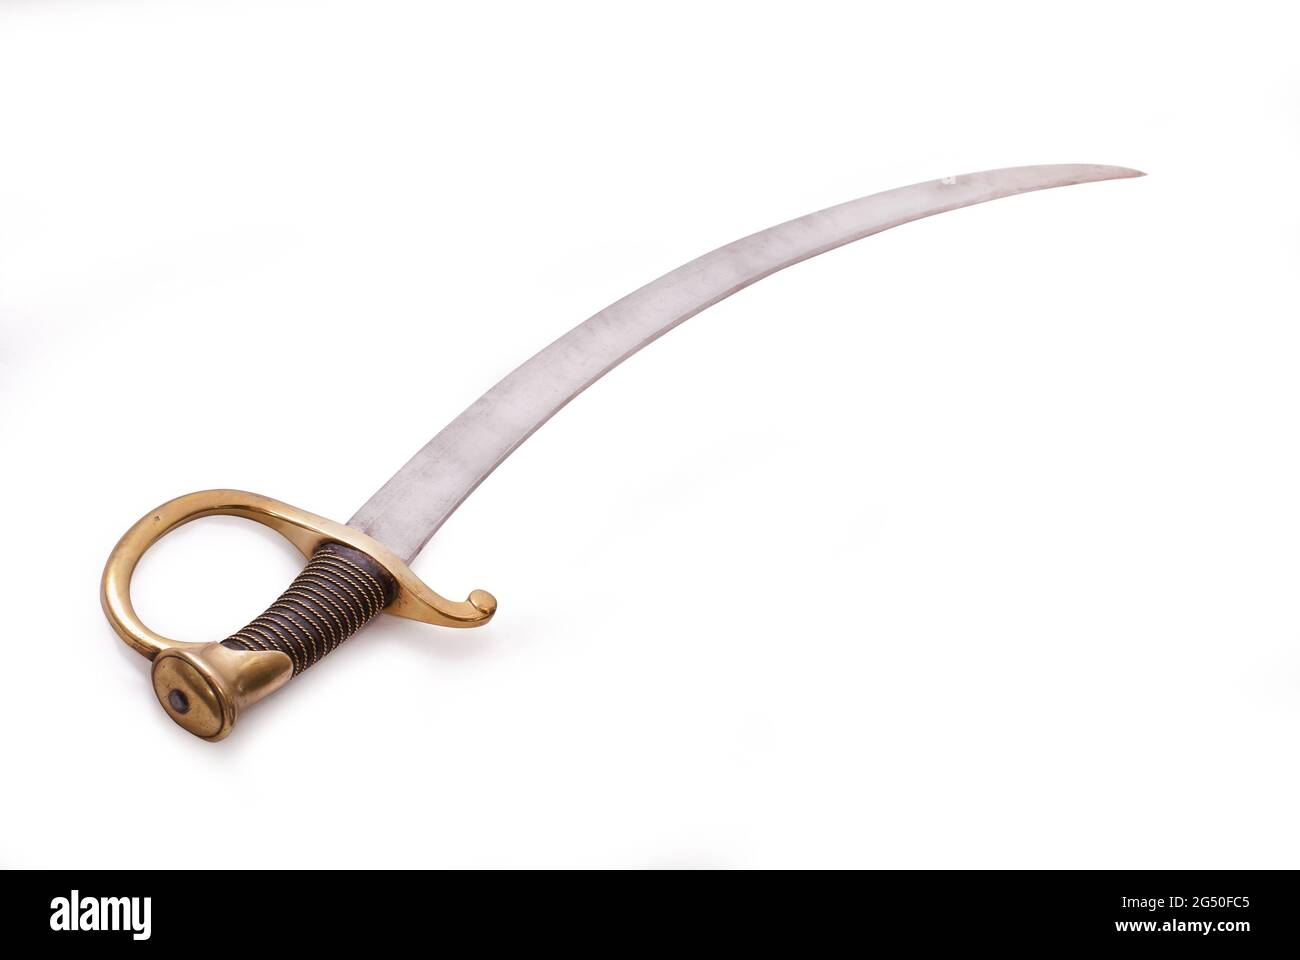 Saber (sabre, cavalry sword) of French horse artillery soldier. Model 1829. Path on white background. Stock Photo